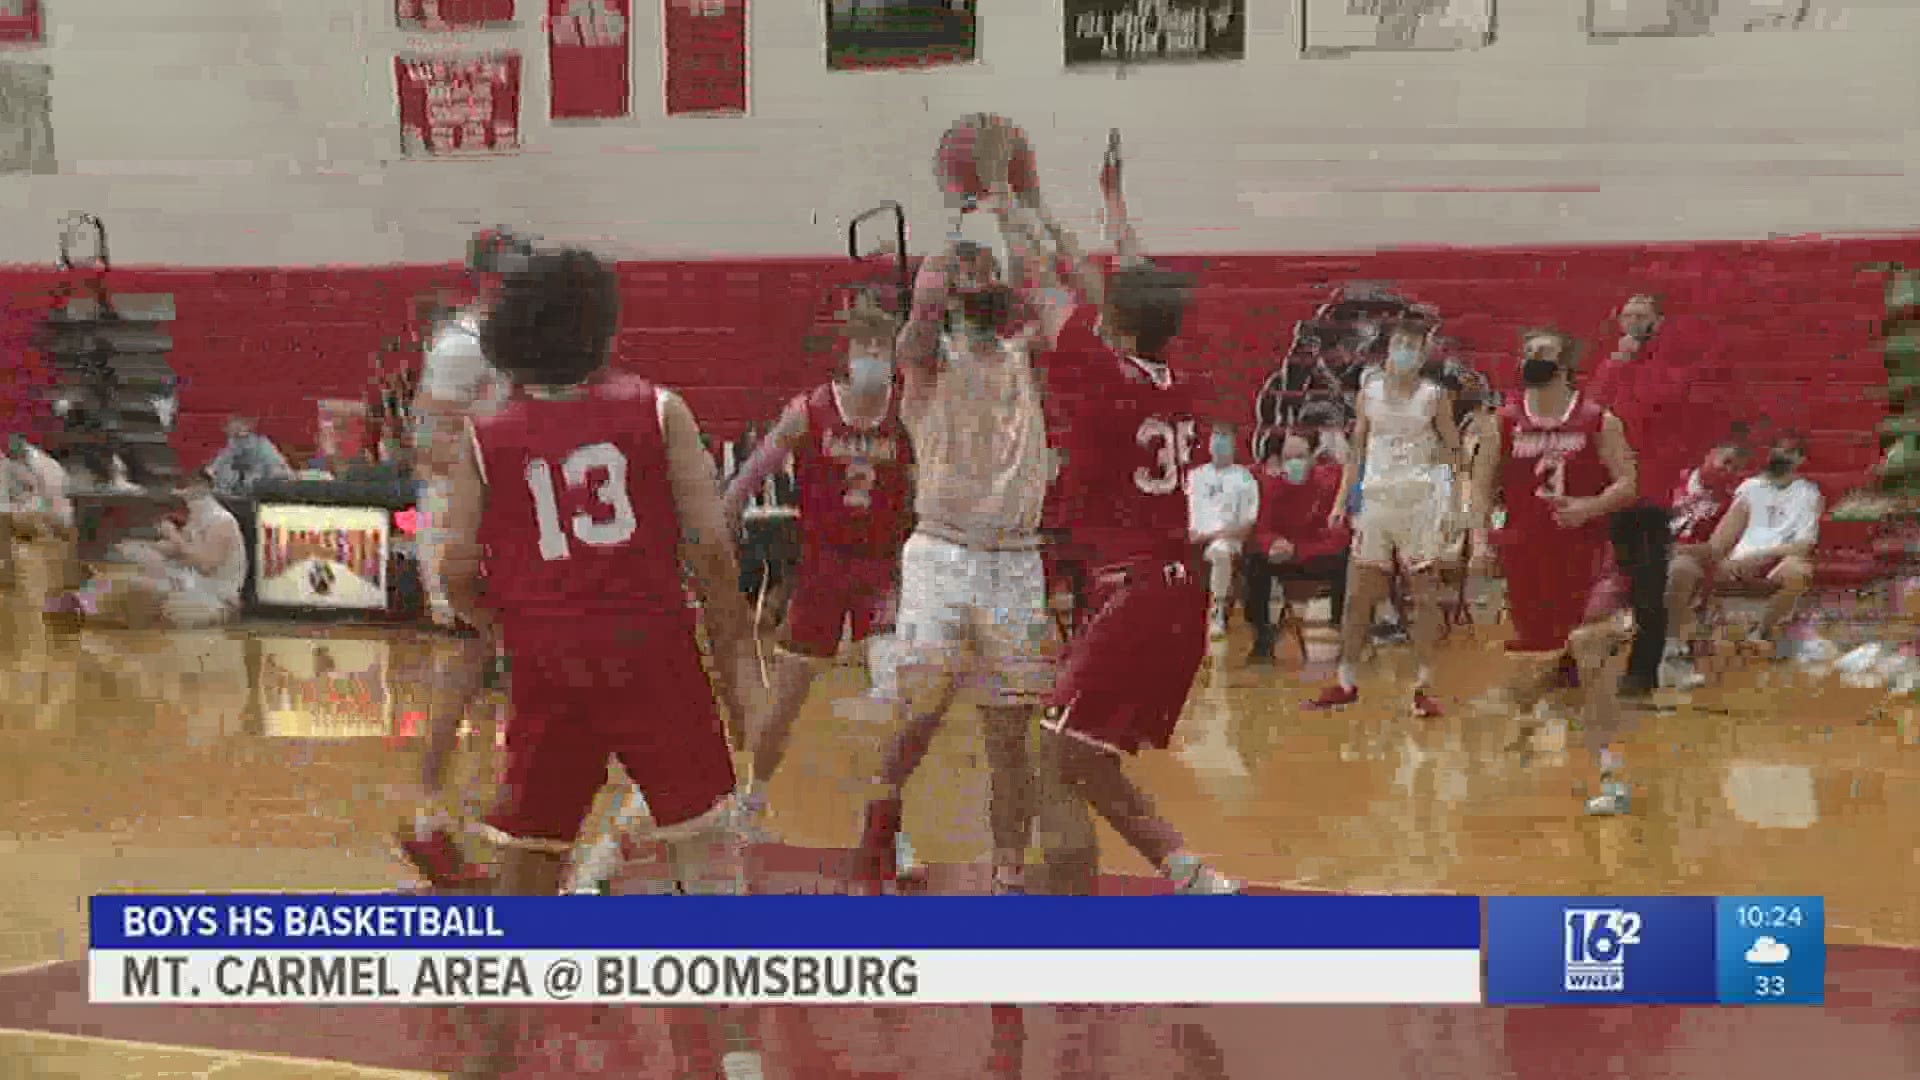 Bloomsburg rallies past Mt. Carmel Area 56-50 in boys HS basketball